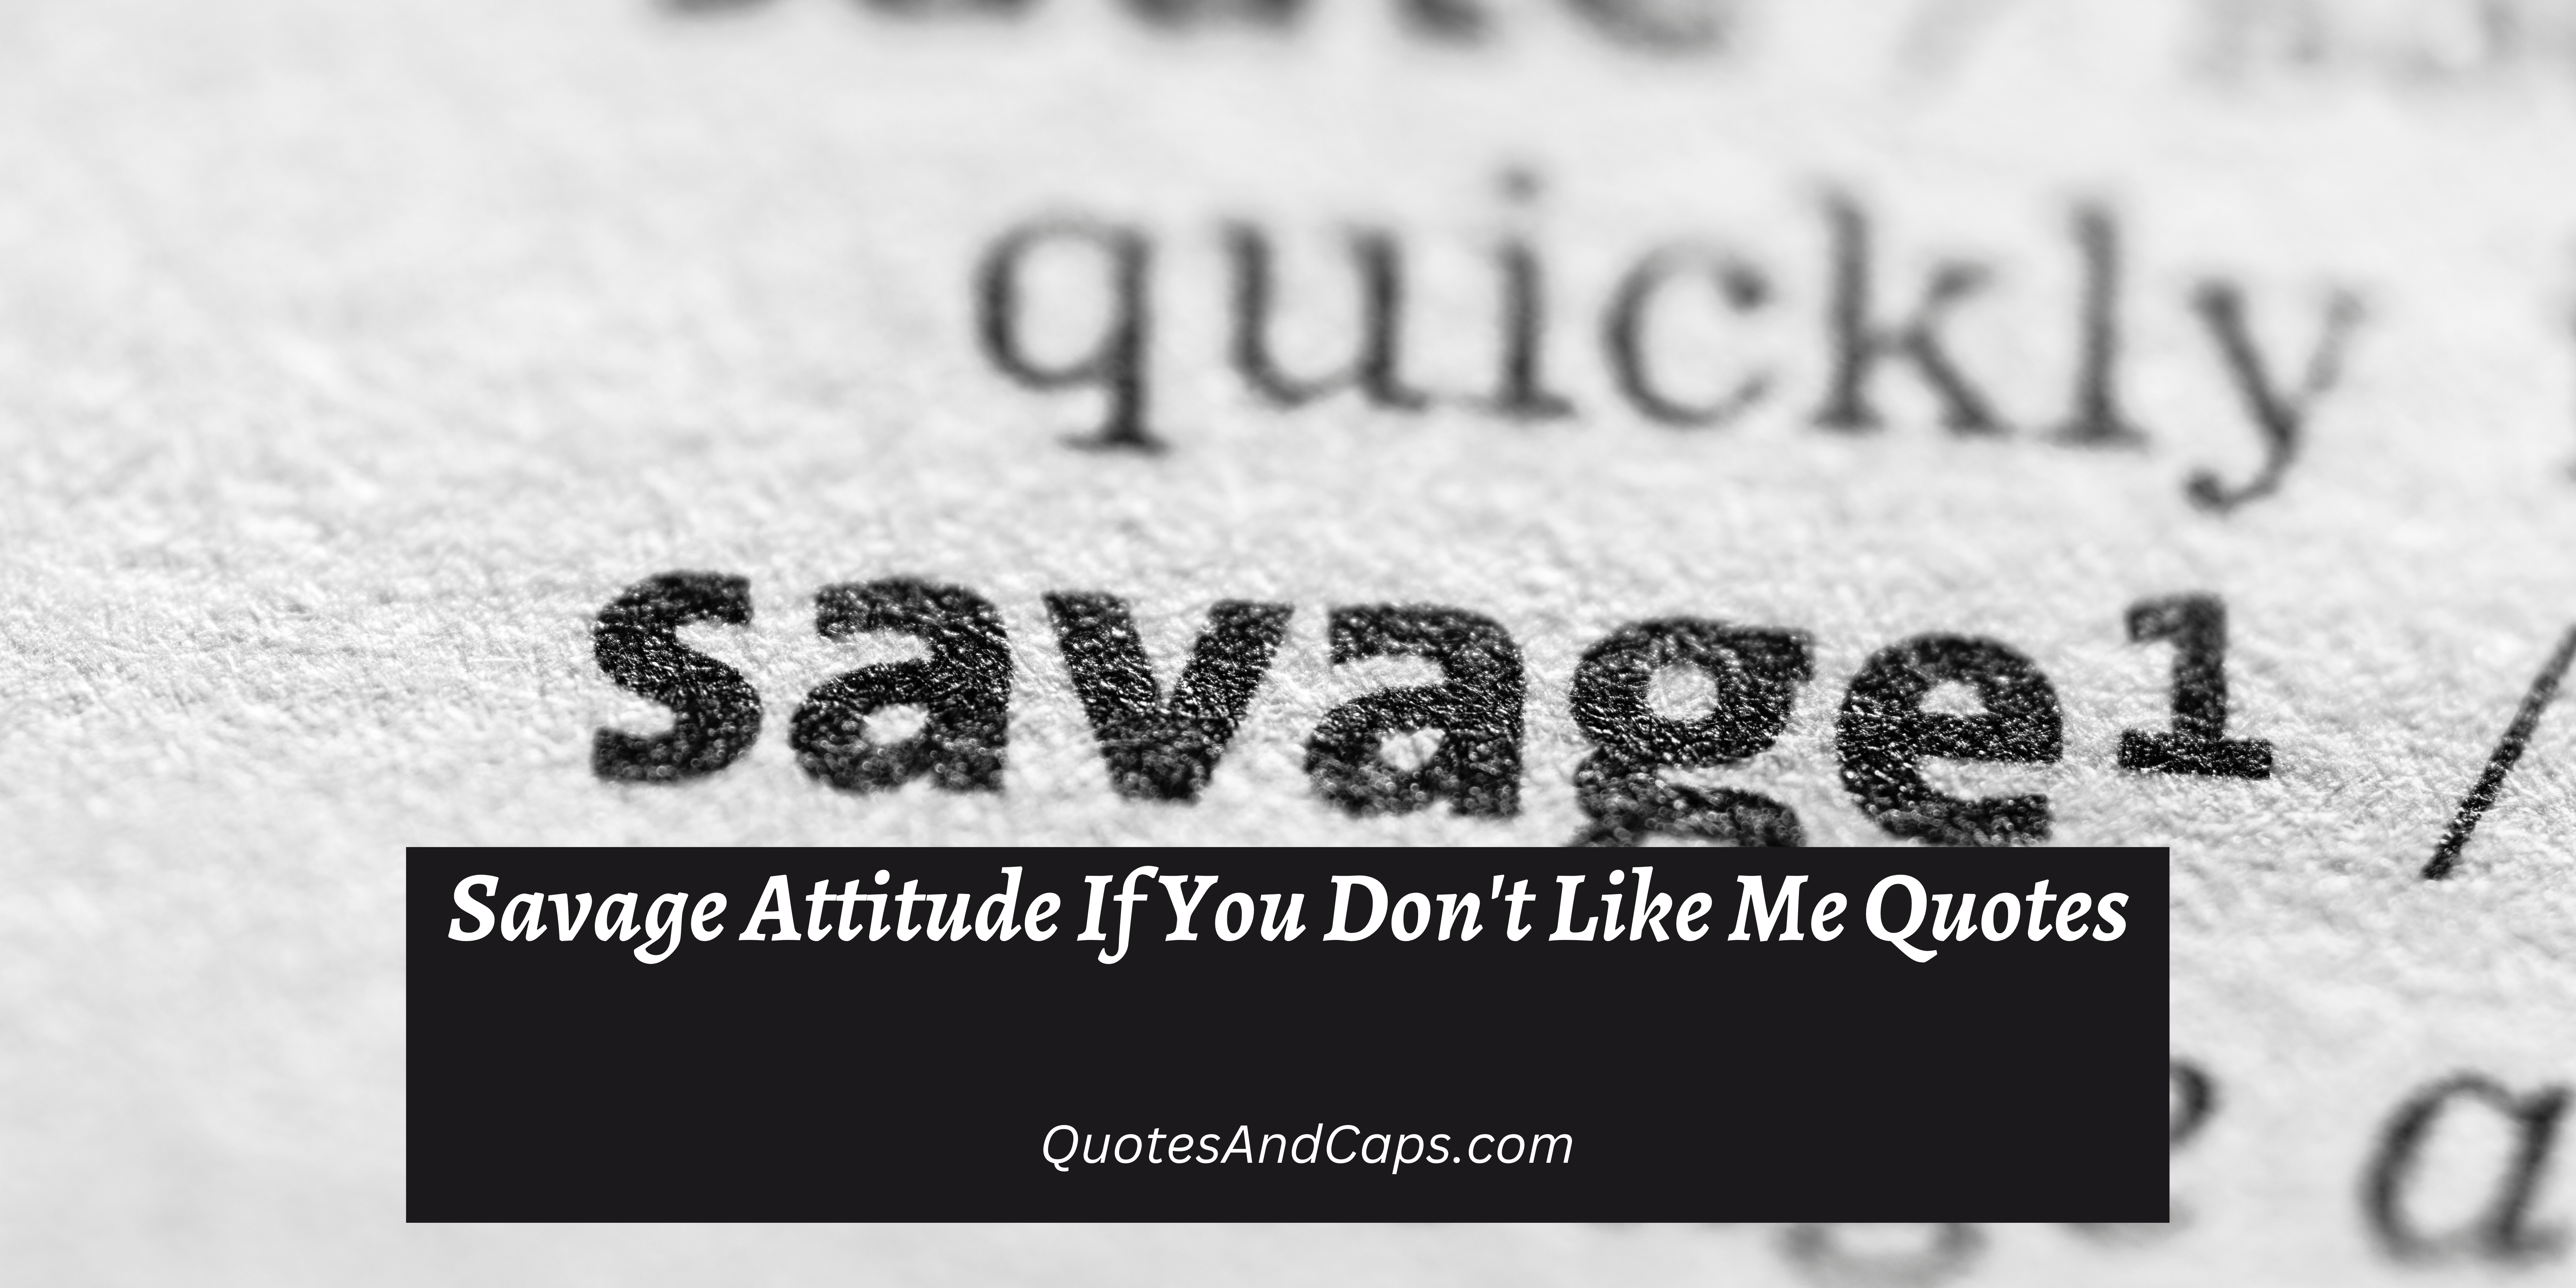 Savage Attitude If You Don’t Like Me Quotes